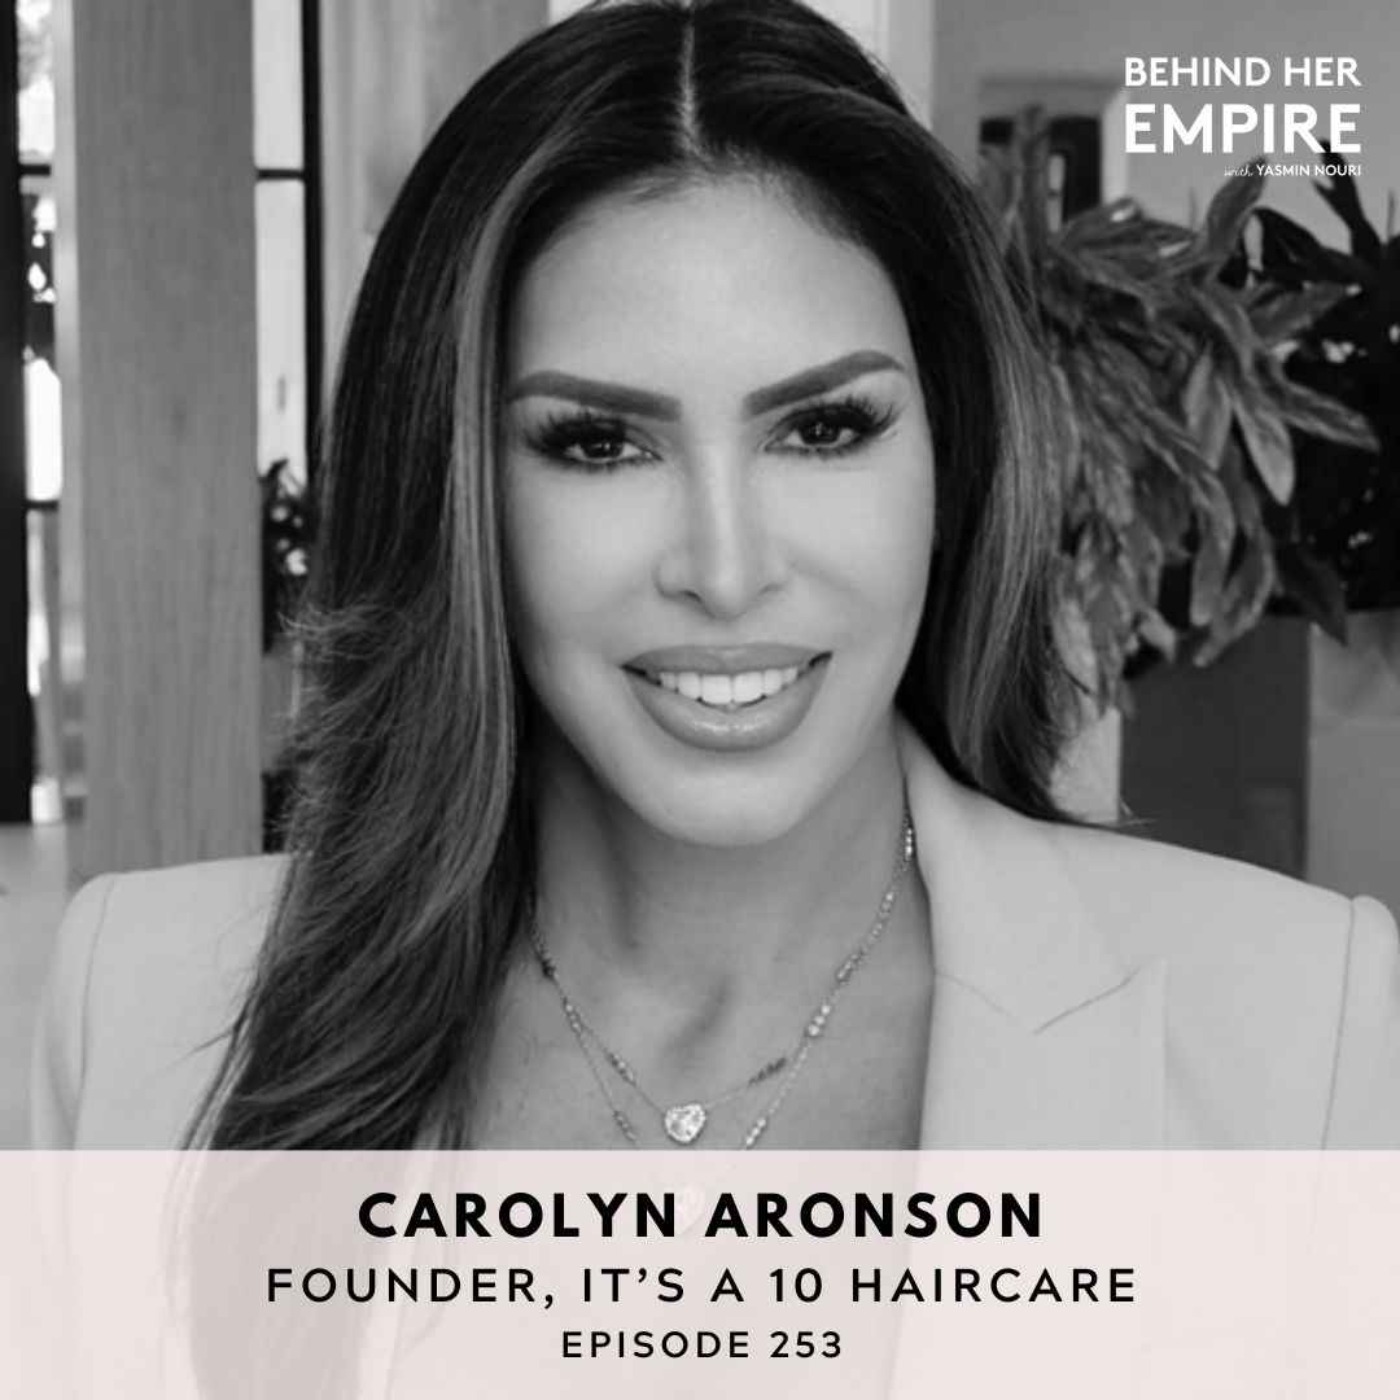 From Foster Care to Billionaire: Top Lessons & Reflections From a Beauty Founder and Luminary – Carolyn Aronson, Founder of It’s a 10 Haircare